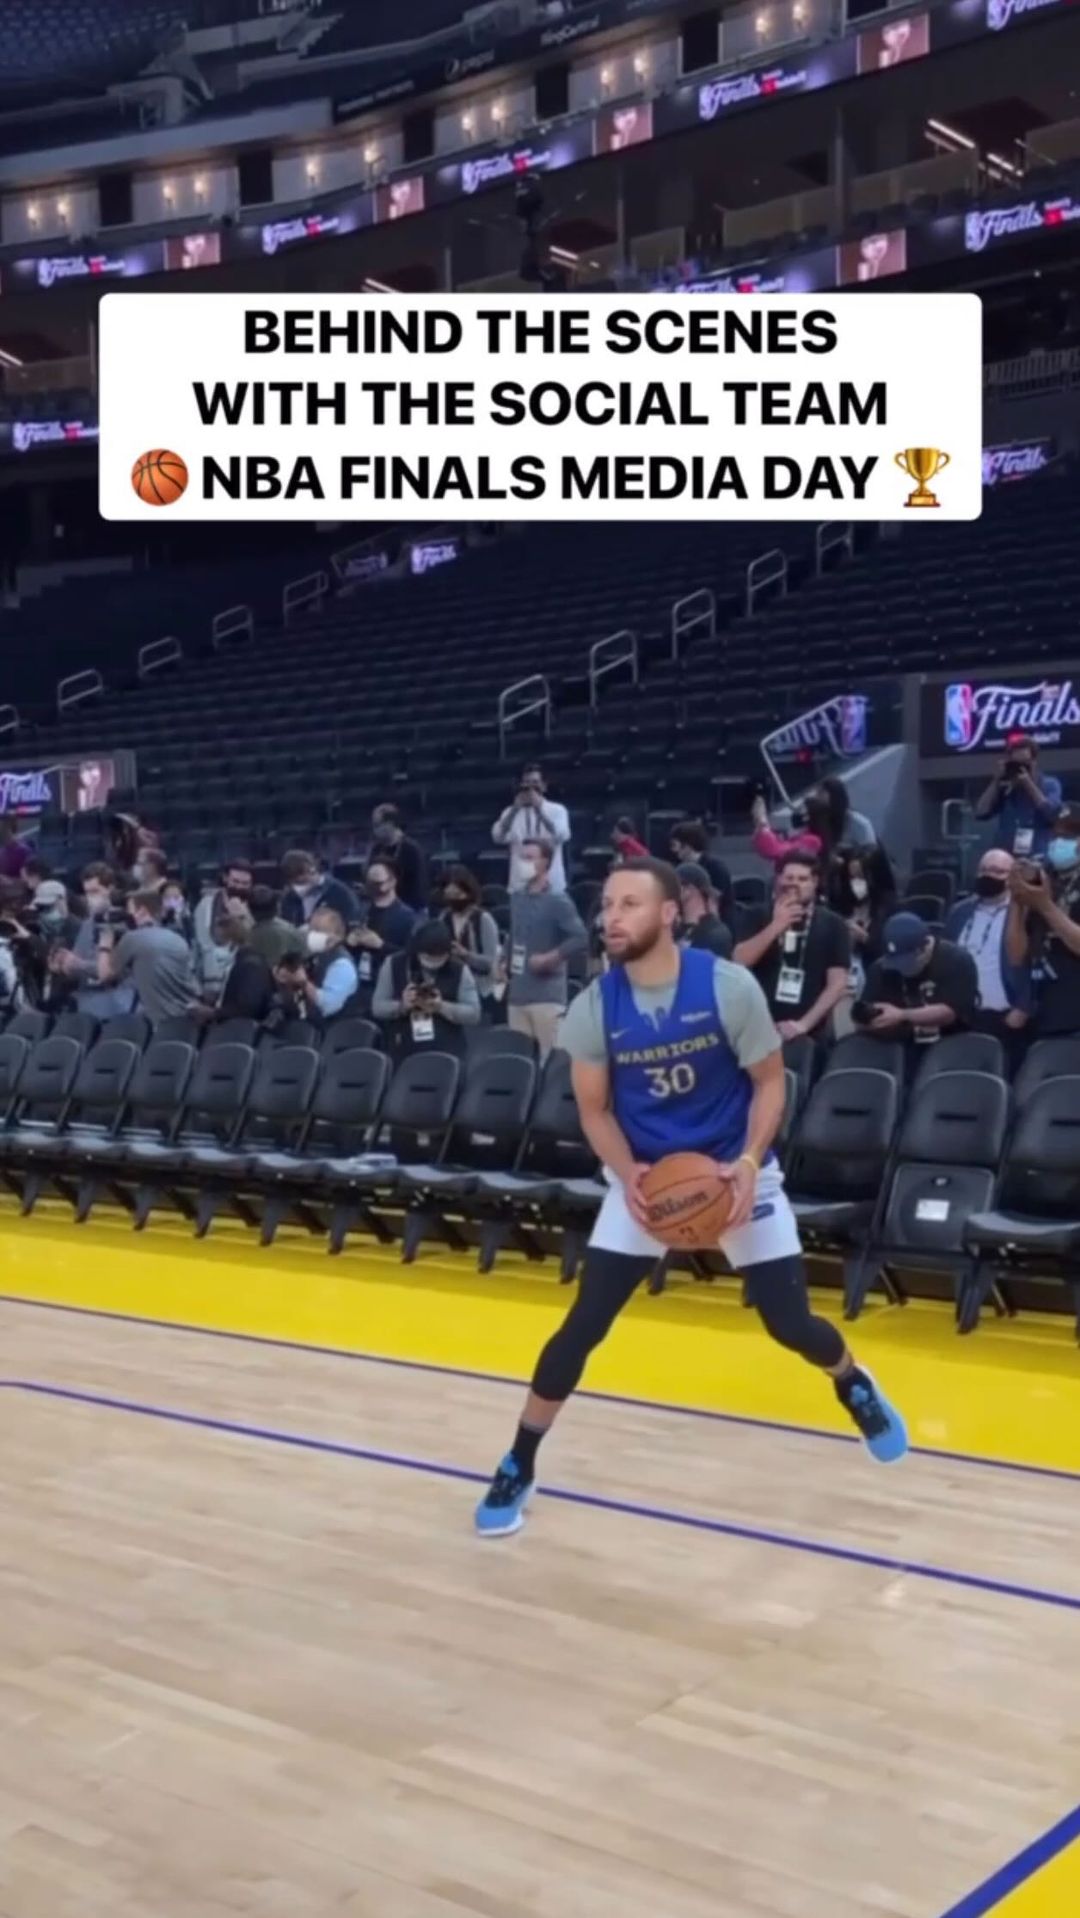 Behind-The-Scenes with the NBA Social Team at Media Day for the 2022 #NBAFinals ...